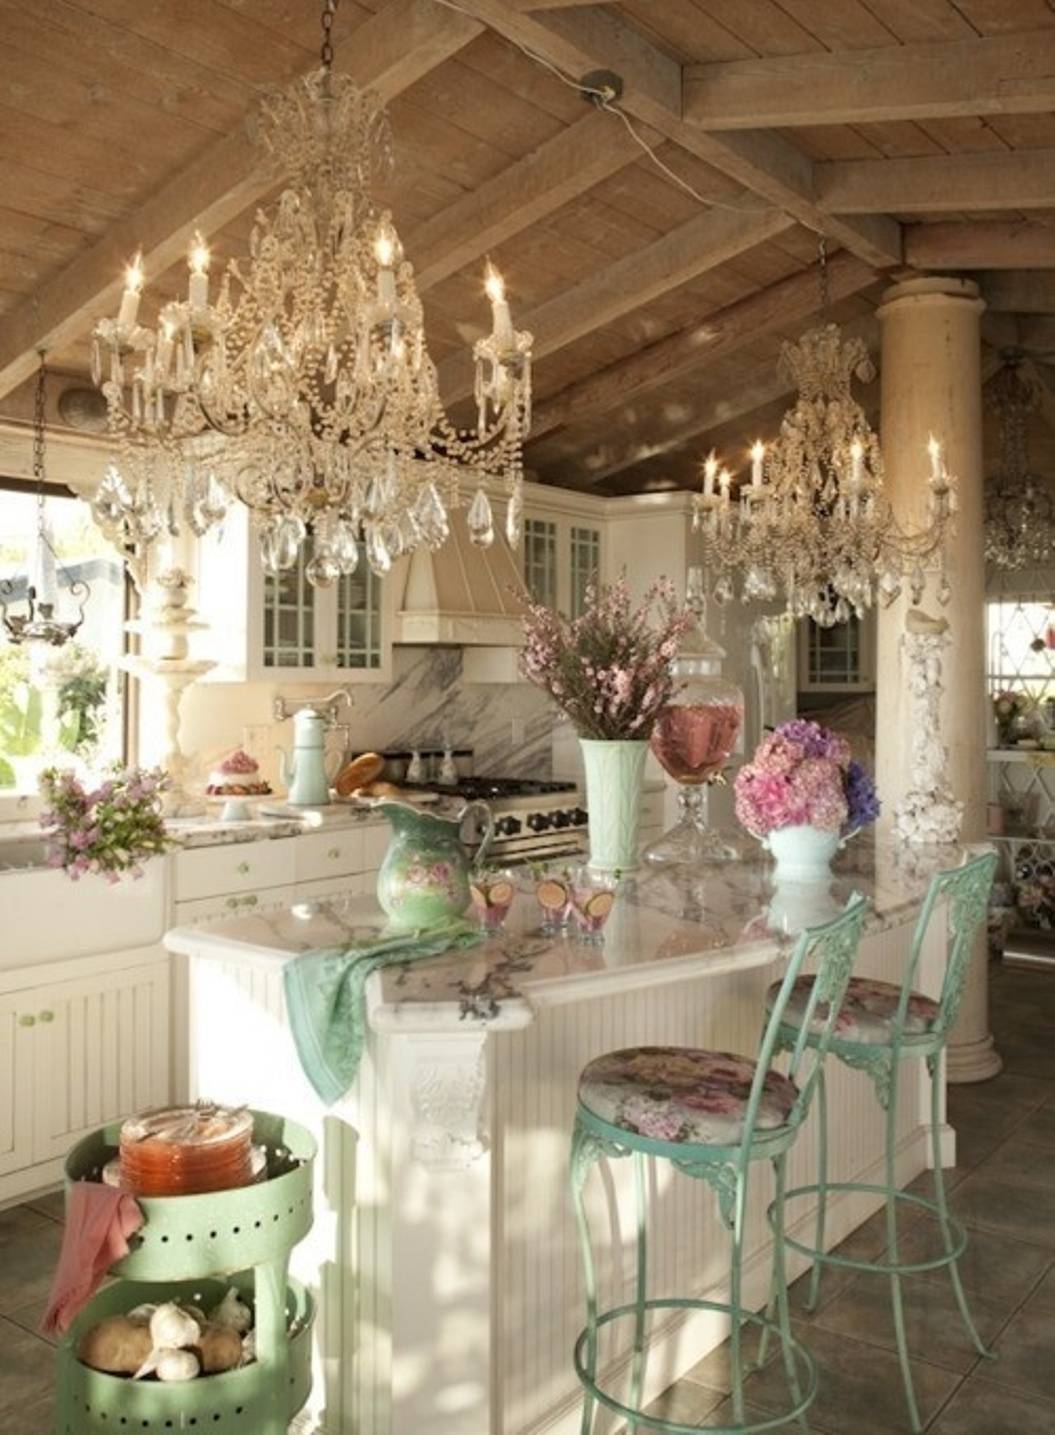 shabby chic kitchen ideas with double kitchen chandelier above kitchen island with seating for two and white cabinets